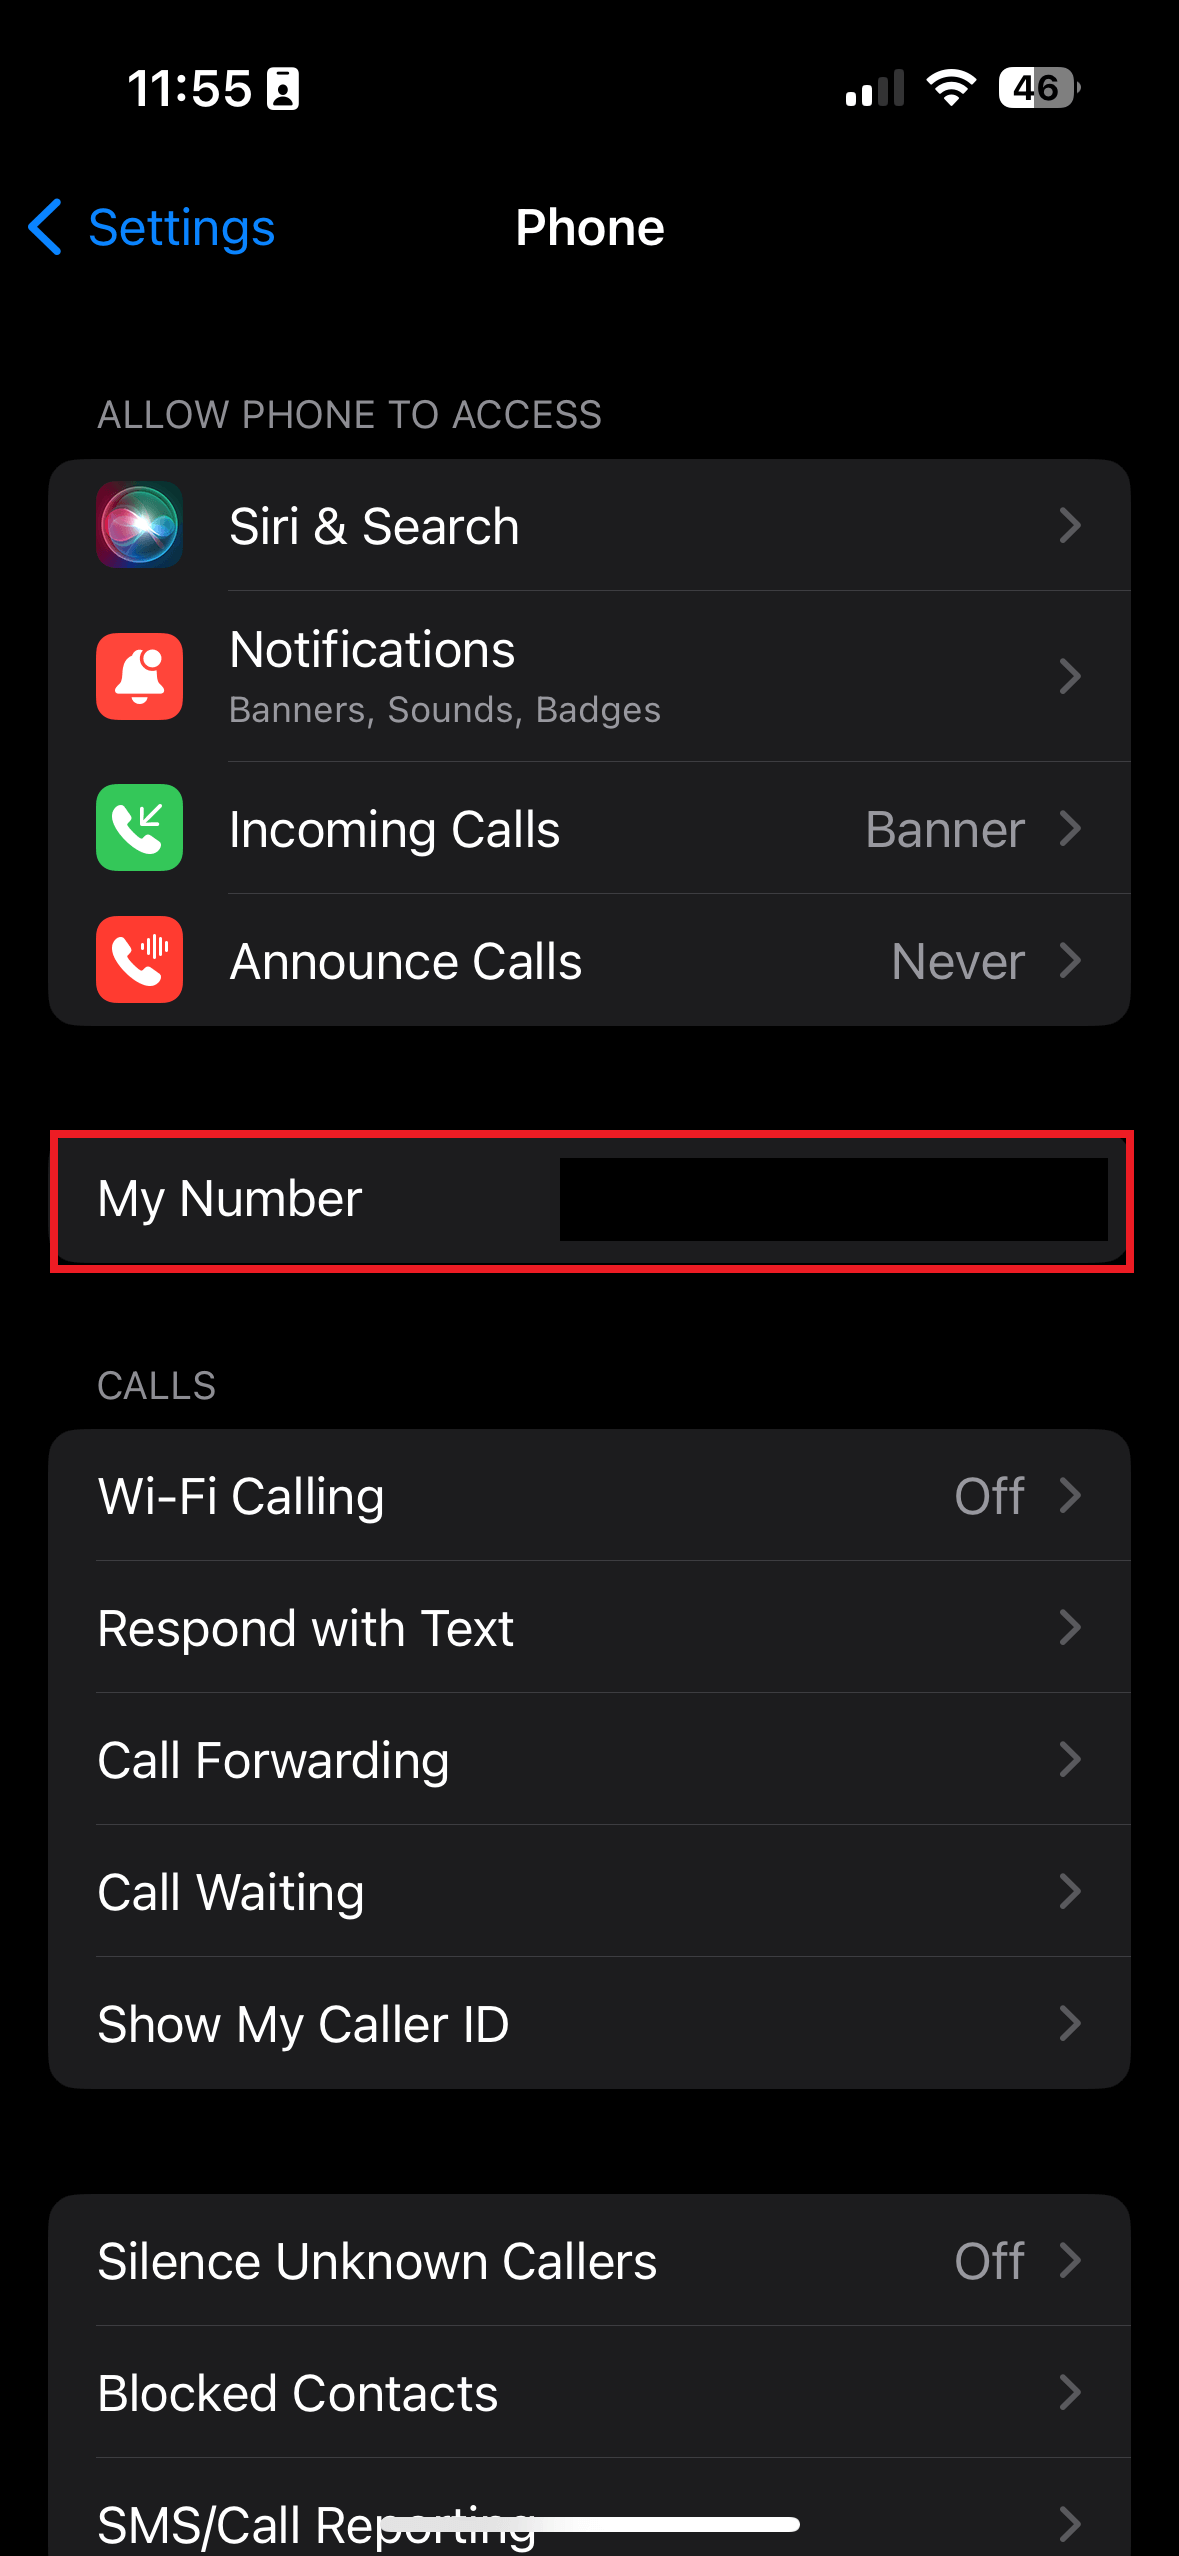 Steps to find my phone number using iPhone Settings